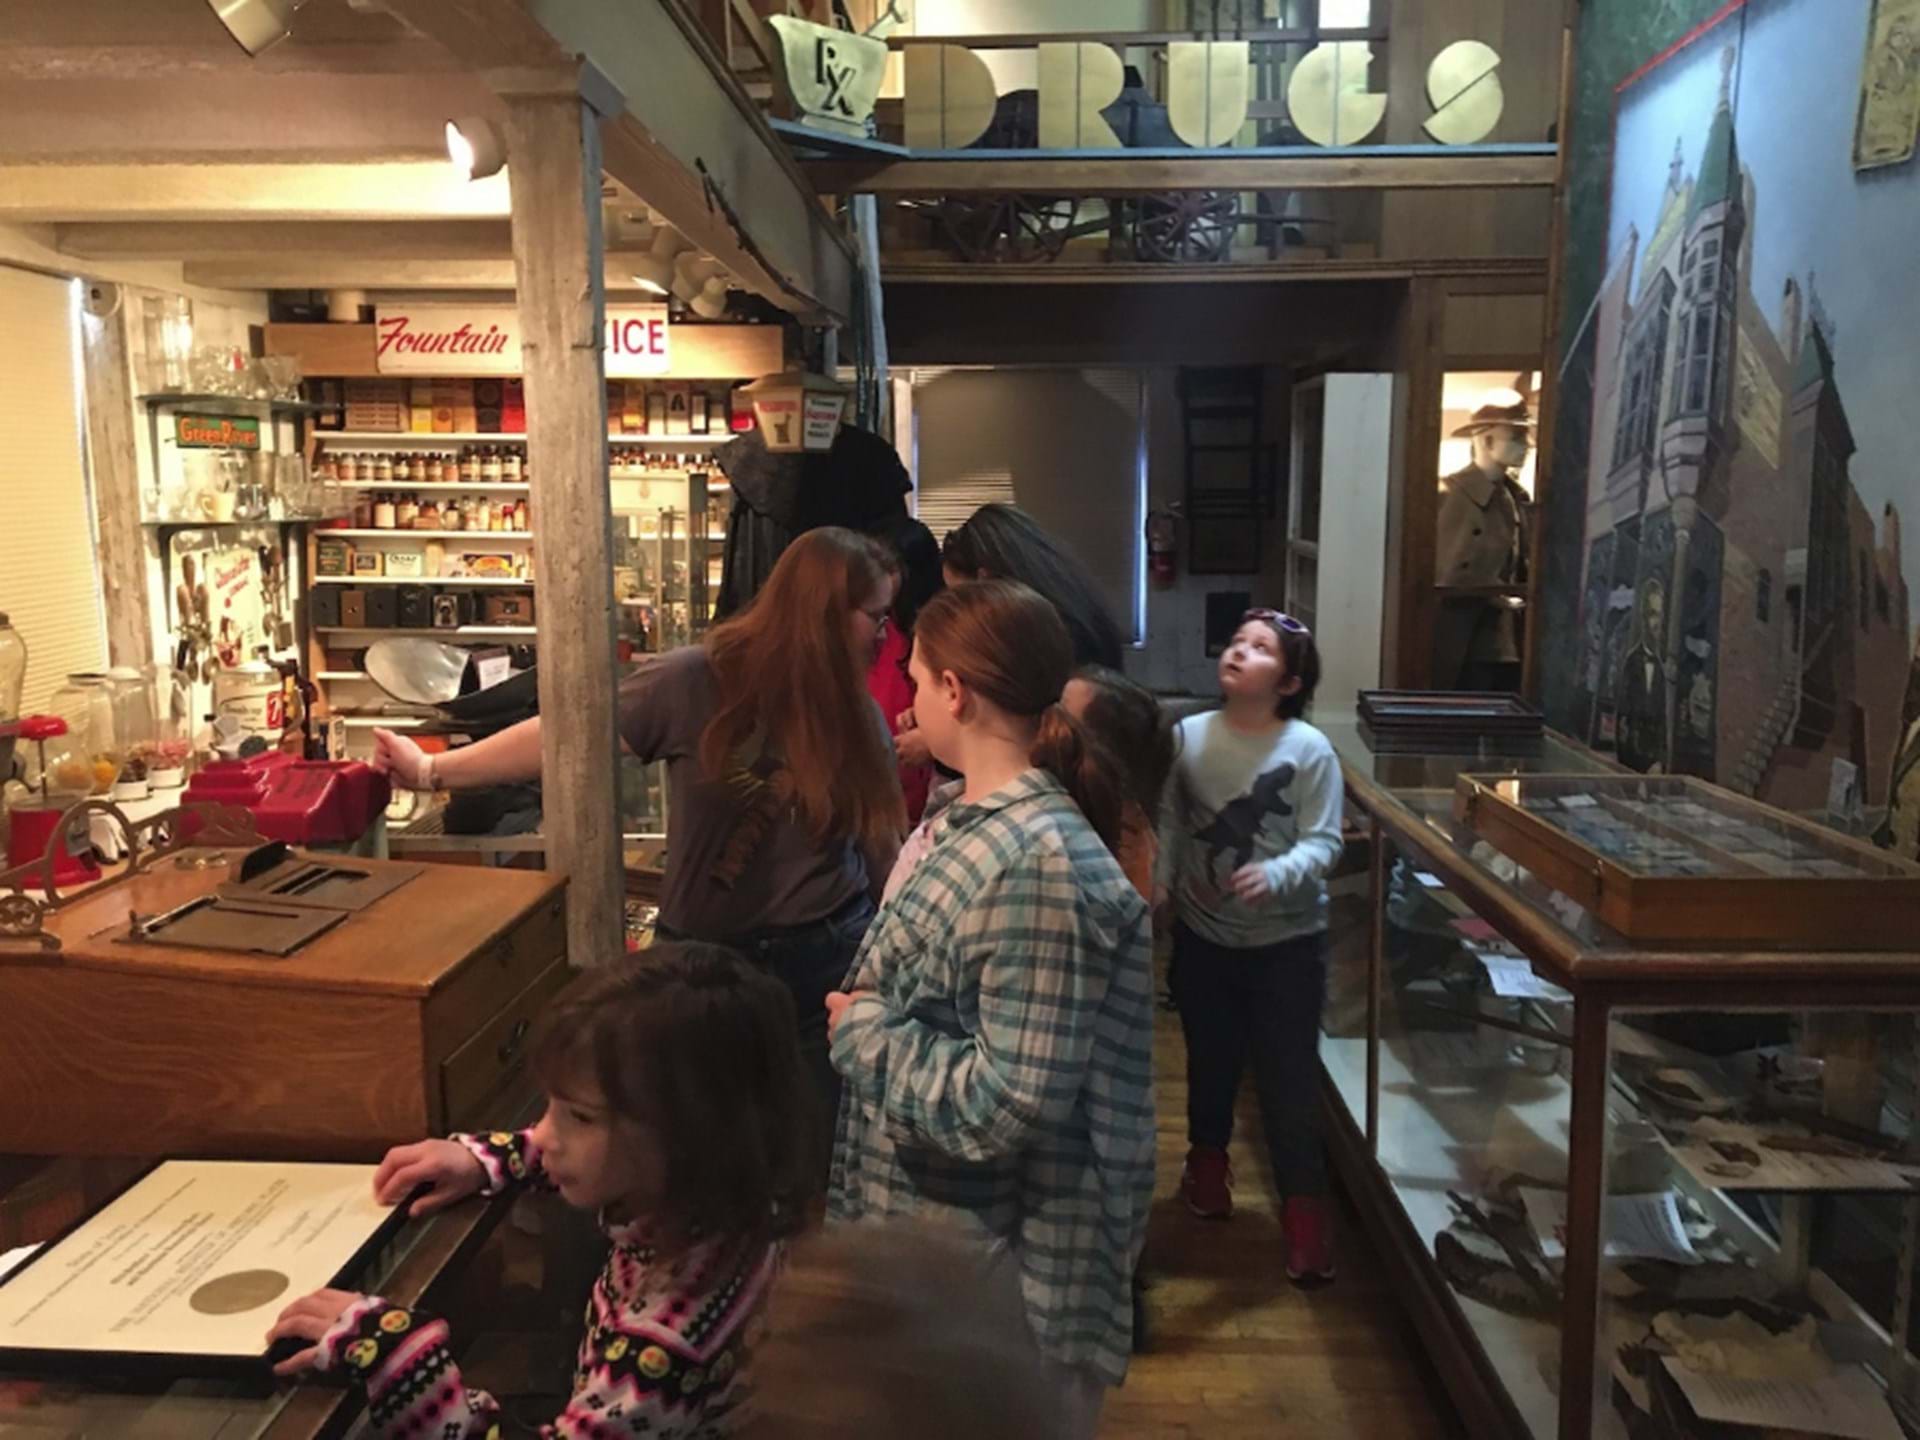 Exploring local history at the Carnegie Museum in Fairfield